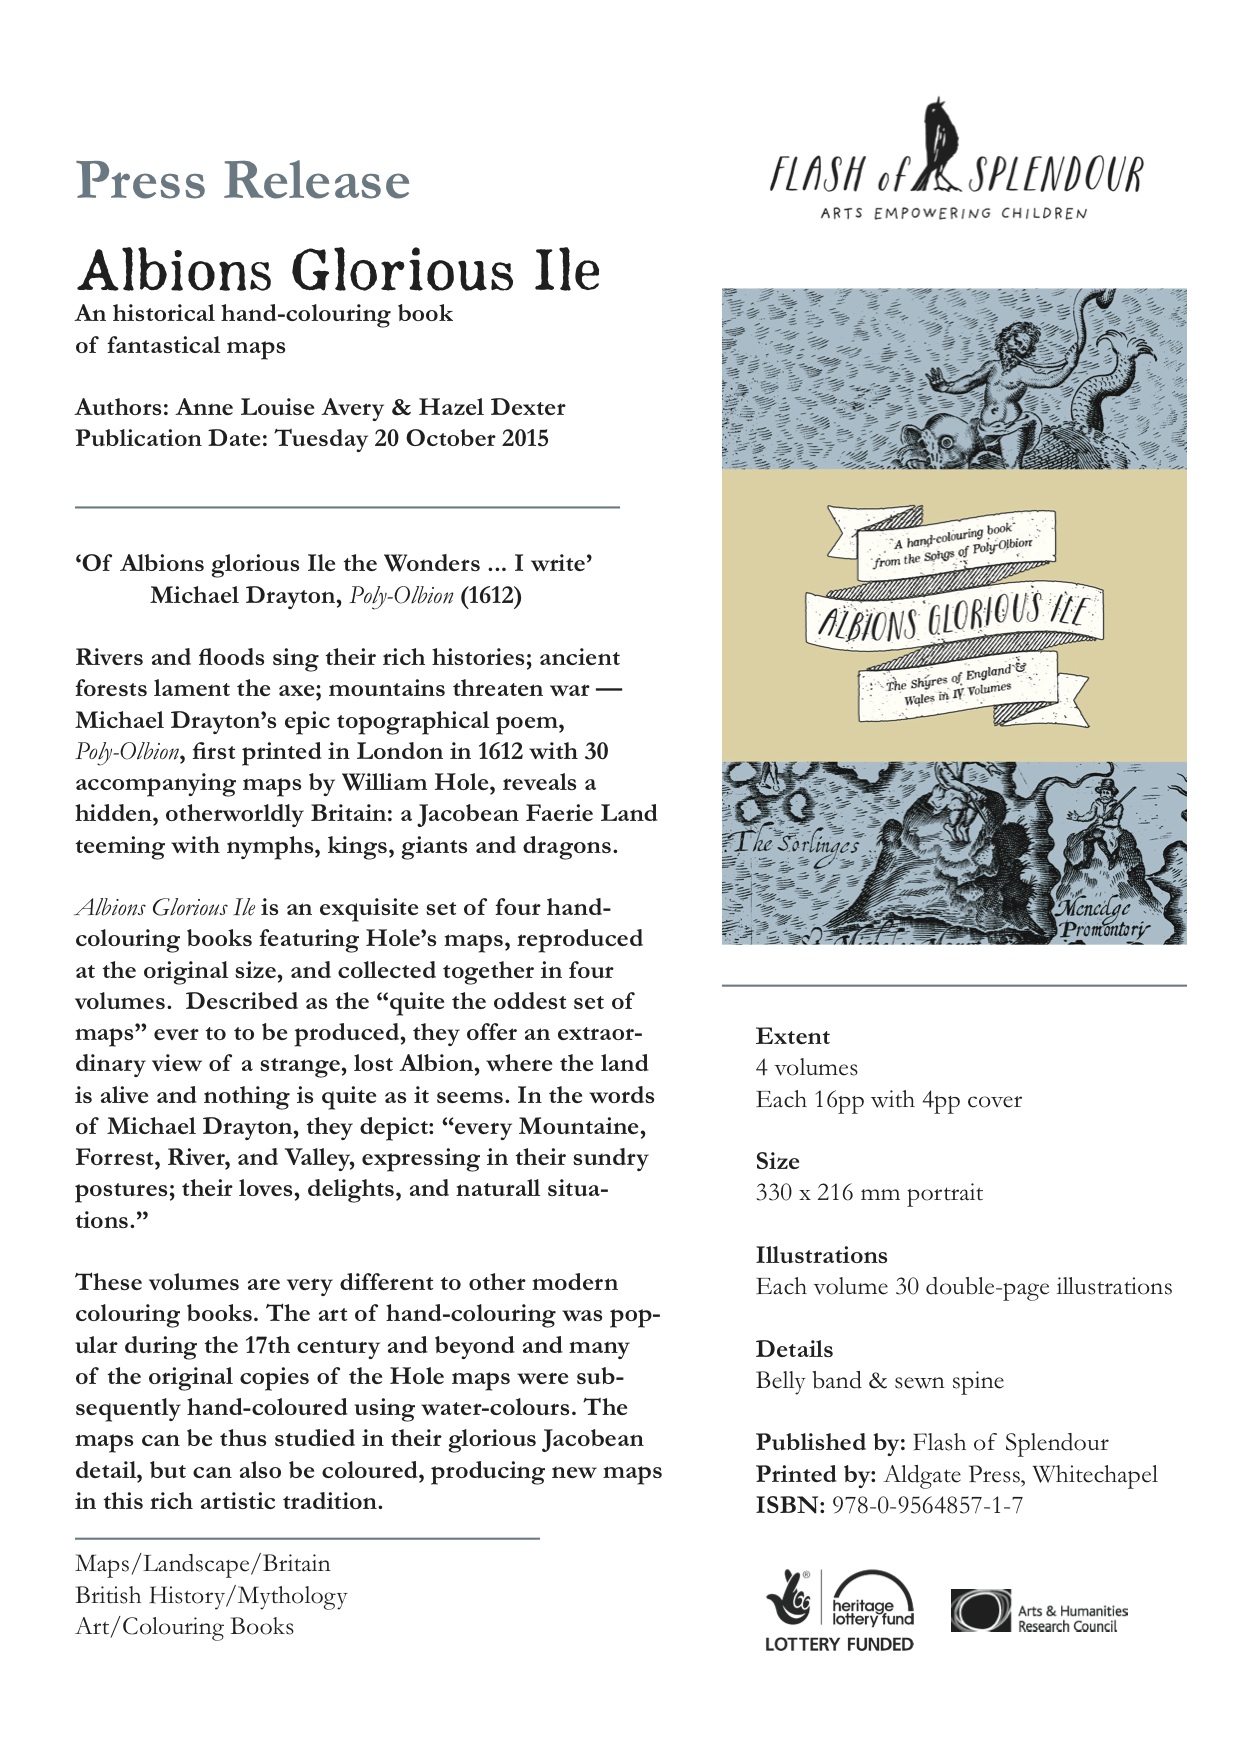 Press Release for Albions Glorious Ile